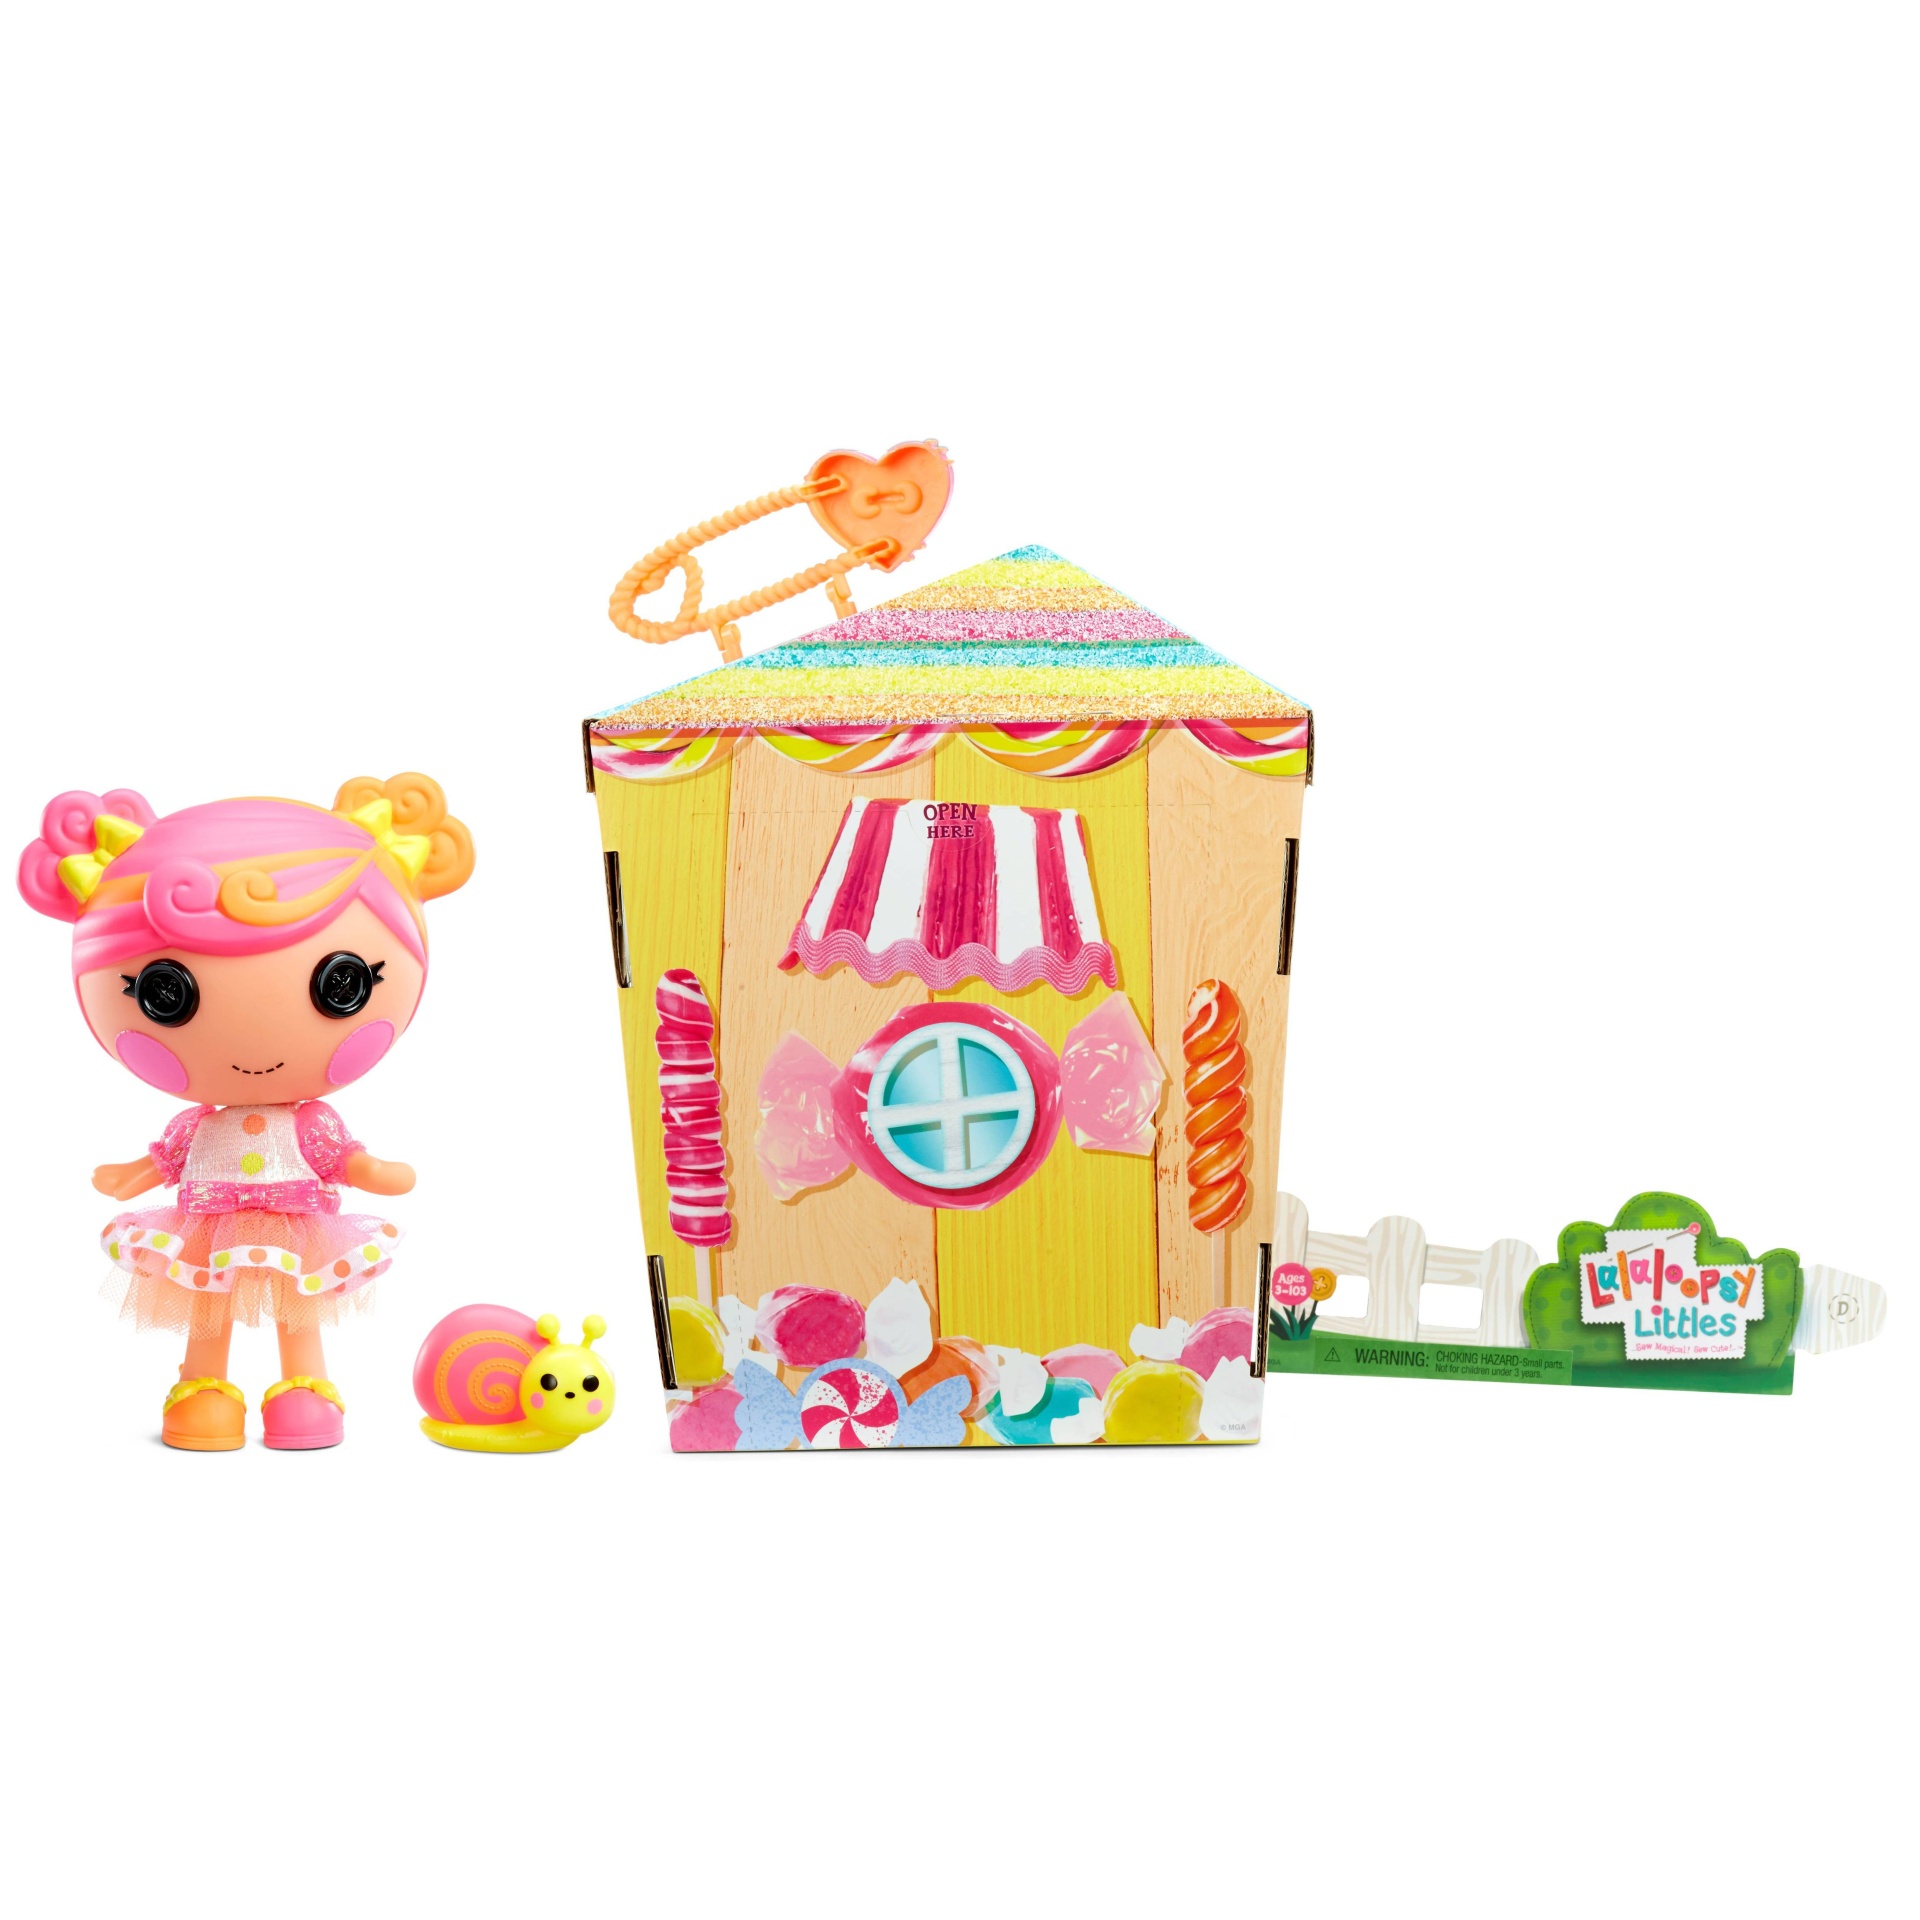 Lalaloopsy Lolly Candy Ribbon Littles Doll 1 ct | Shipt